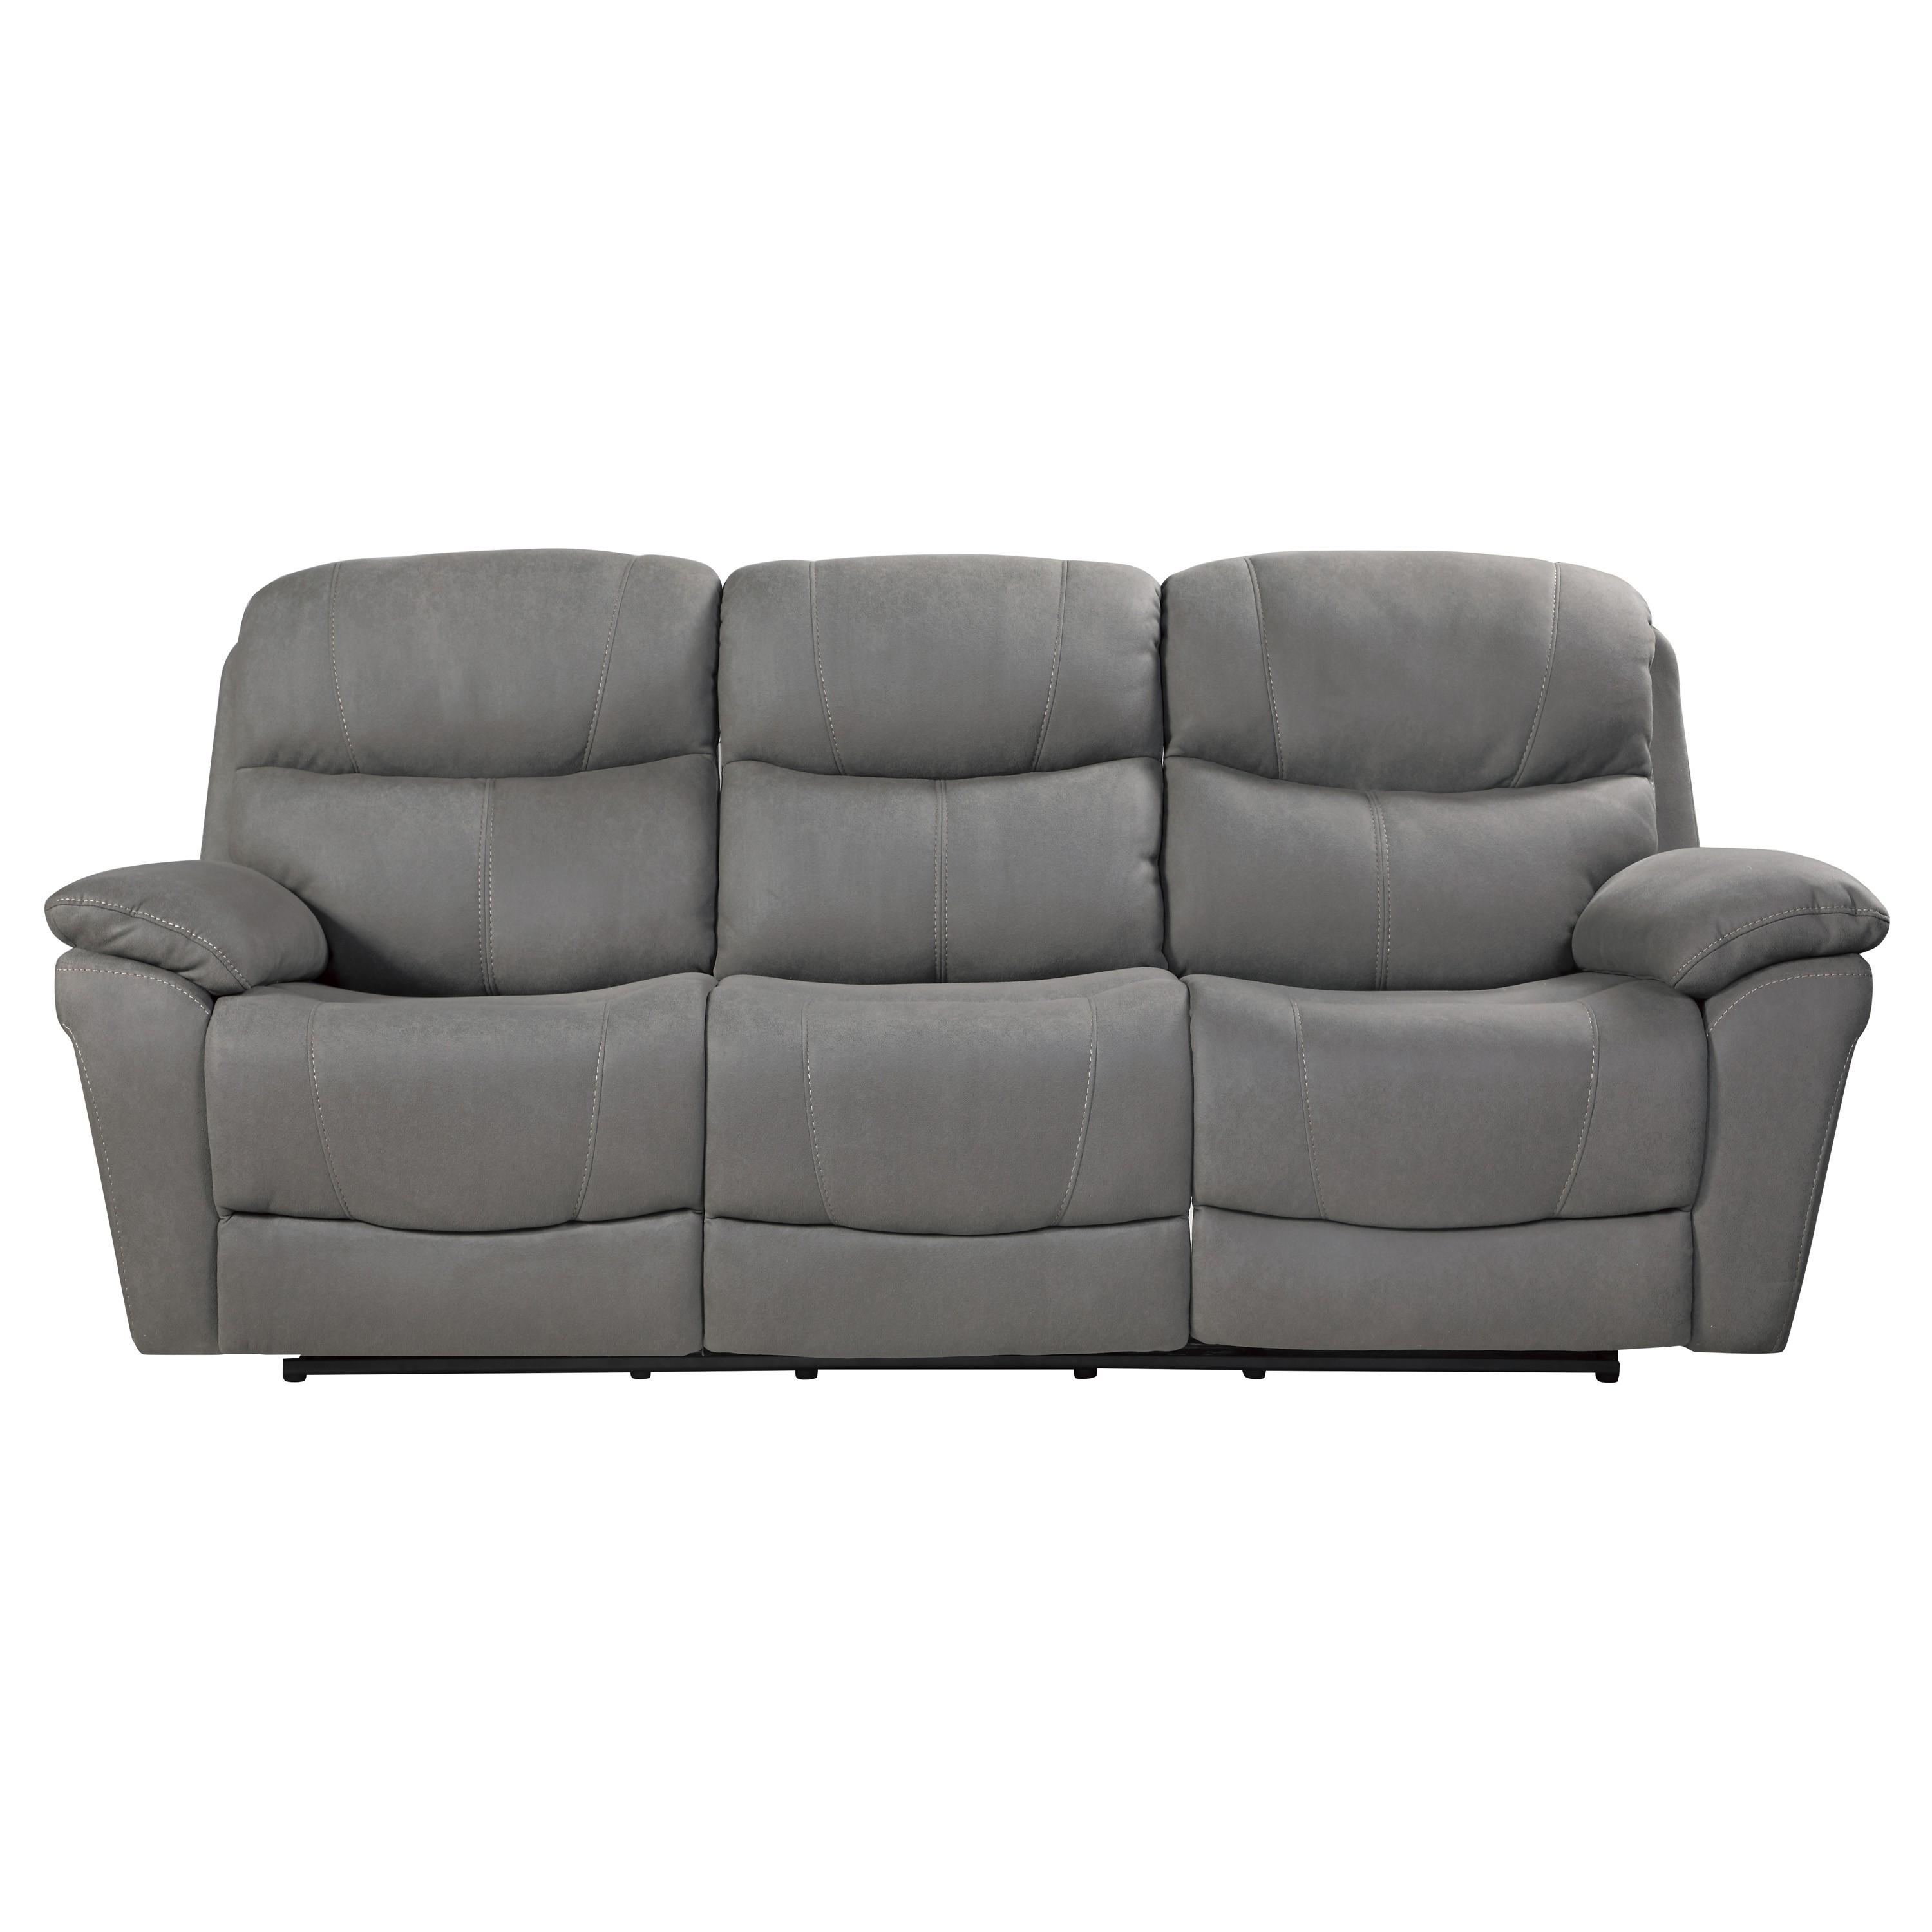 Transitional Power Reclining Sofa 9580GY-3PWH Longvale 9580GY-3PWH in Gray Microfiber